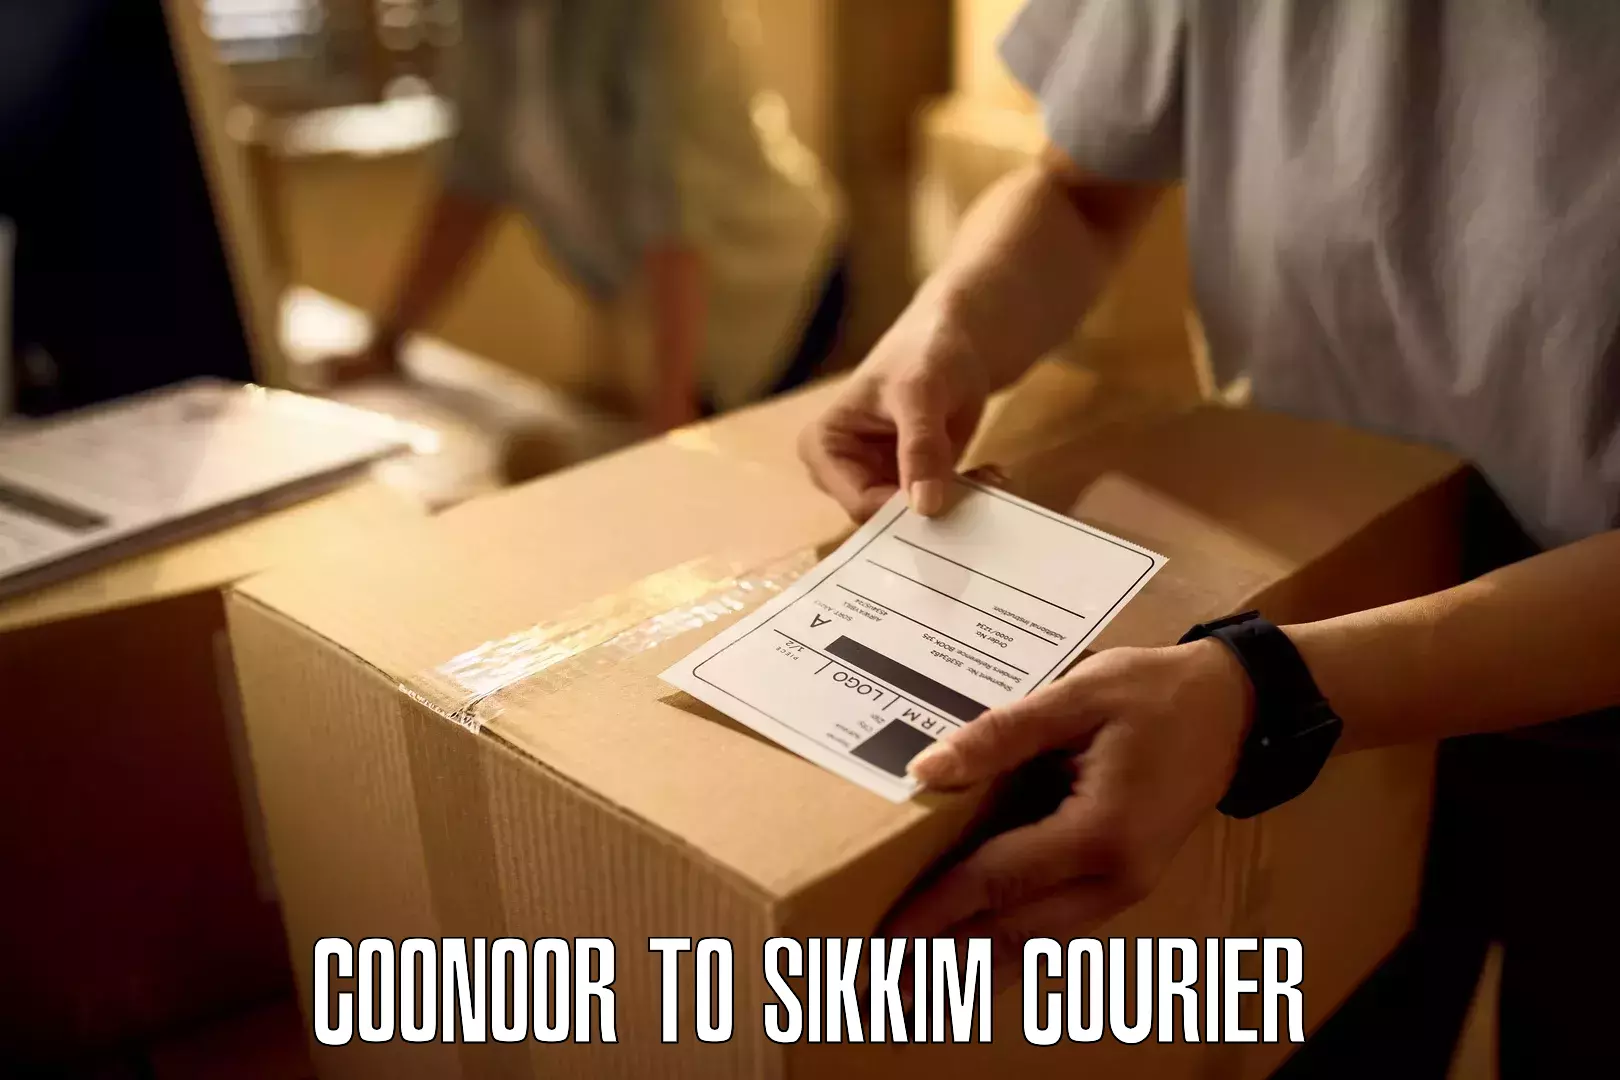 Advanced shipping technology Coonoor to Sikkim